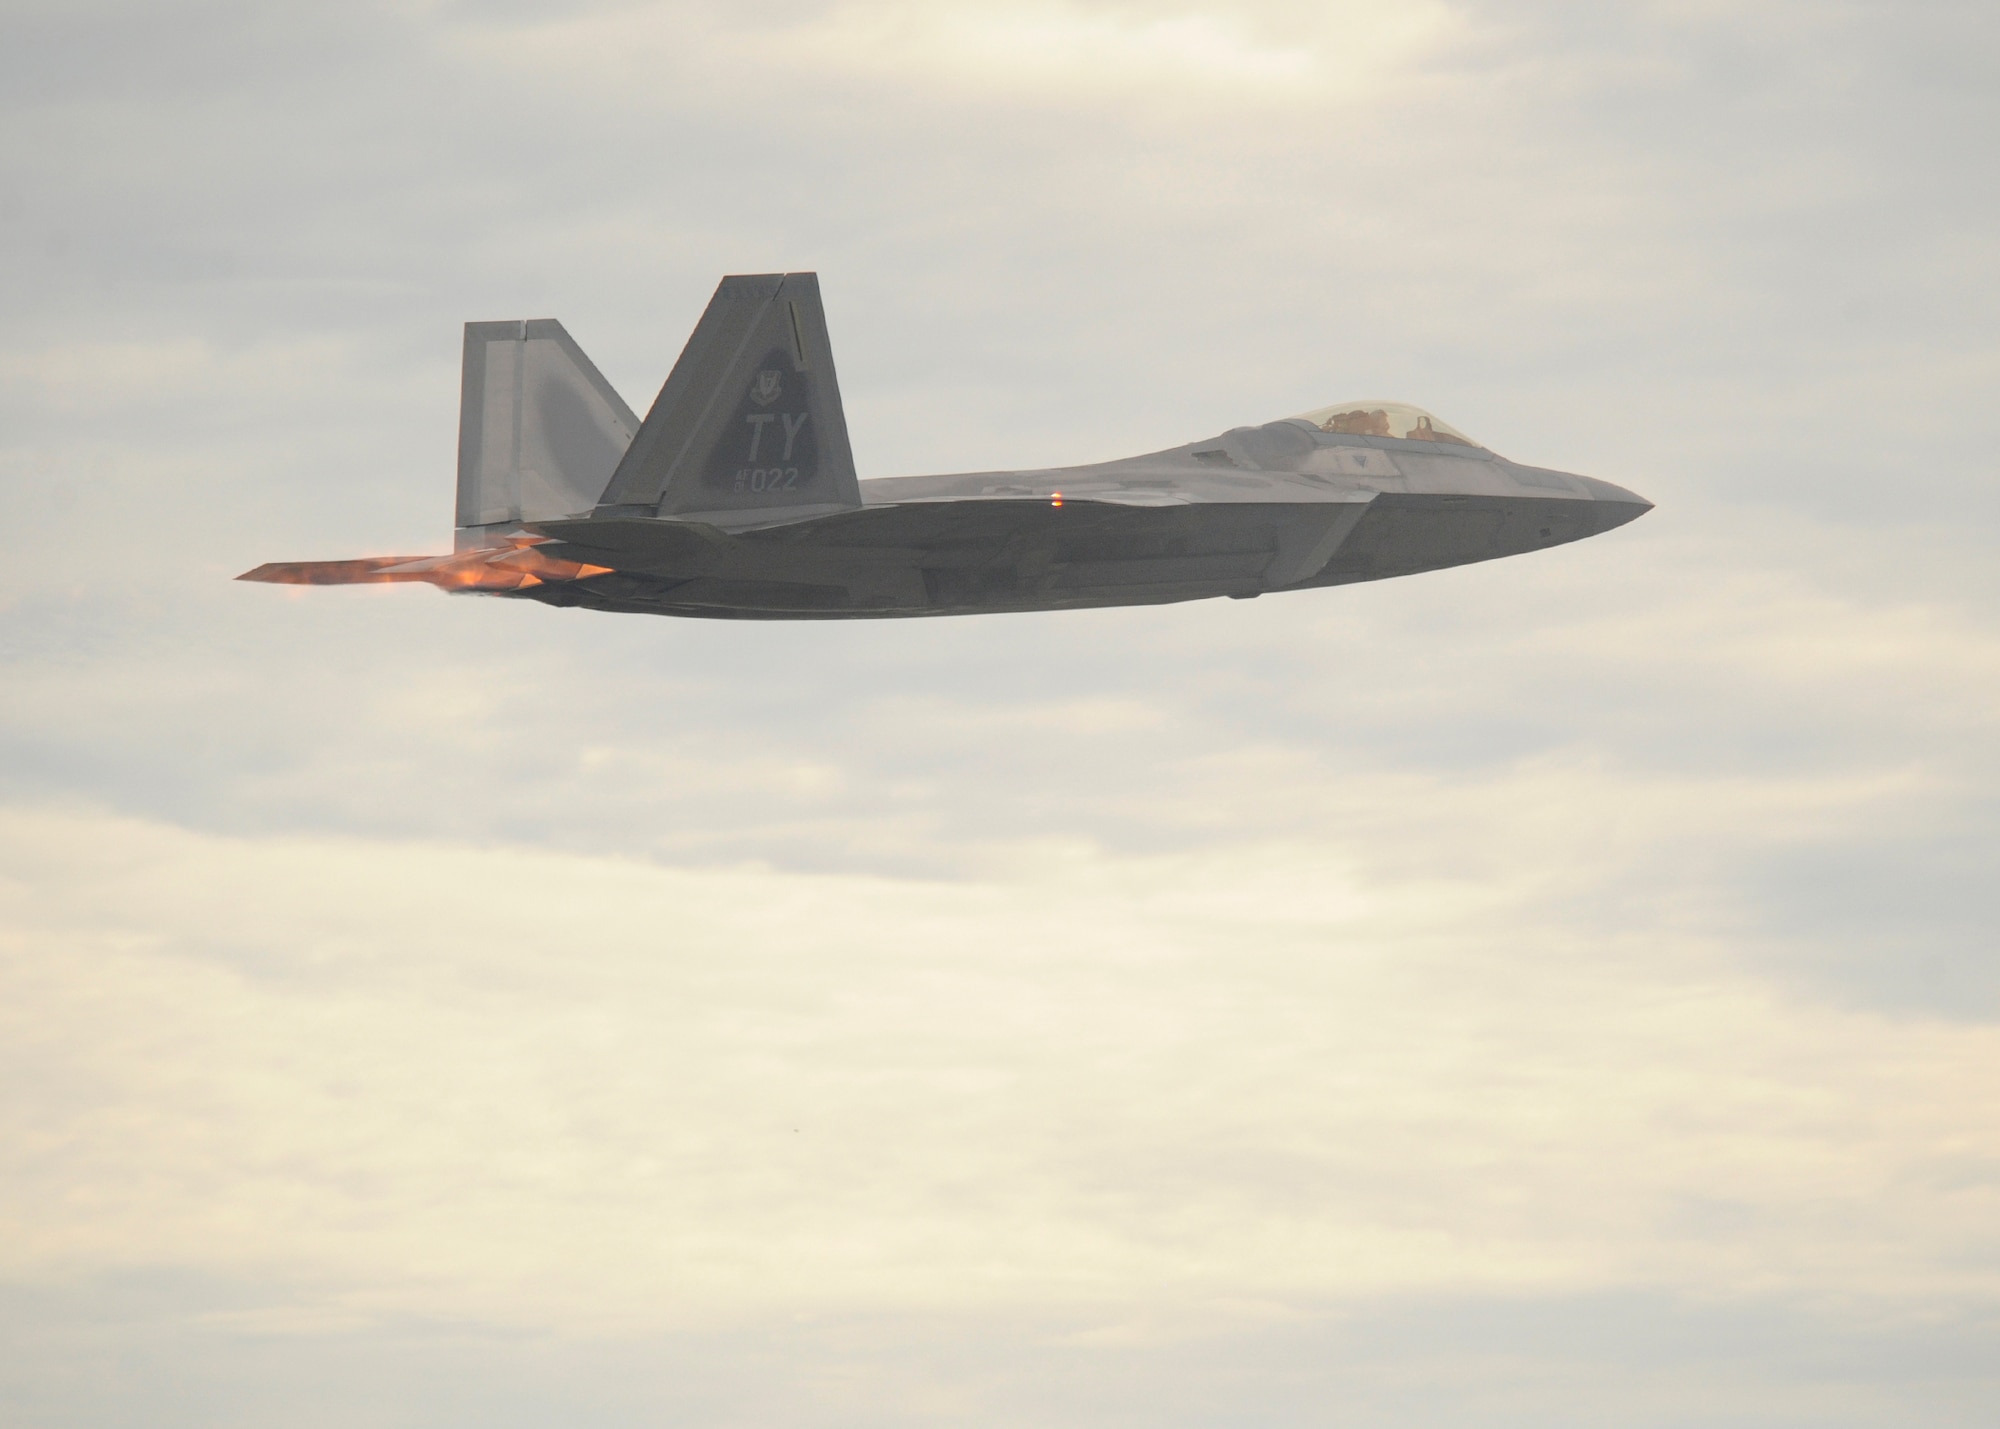 An F-22 Raptor, from the 43rd Fighter Squadron, takes off in Savannah, Ga., during Sentry Savannah 16-3, Aug. 2, 2016. The F-22 is a fifth-generation fighter aircraft. (U.S. Air Force photo/Senior Airman Solomon Cook)